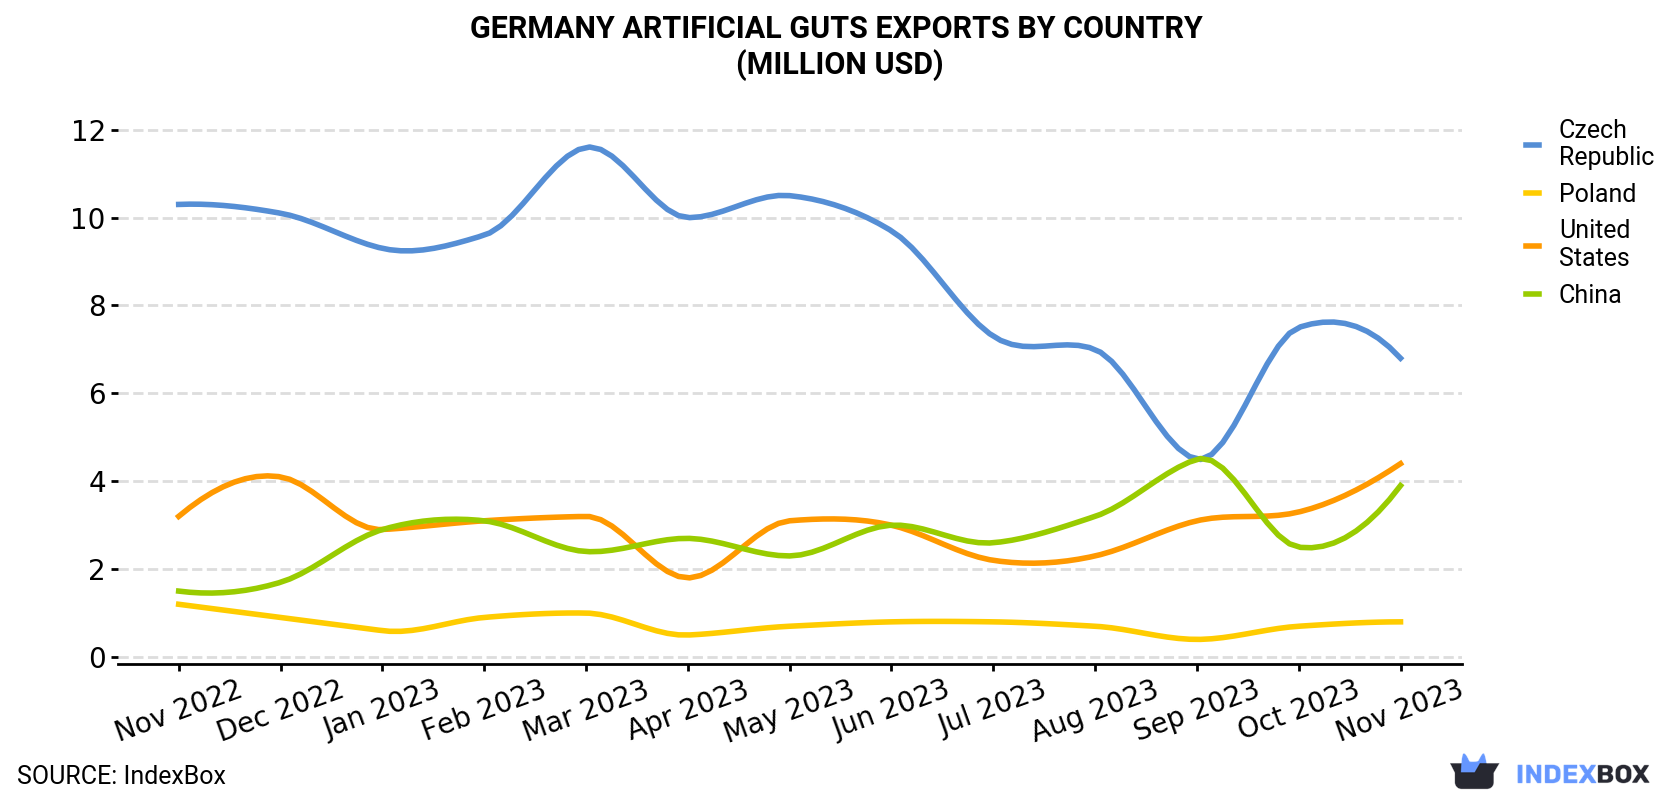 Germany Artificial Guts Exports By Country (Million USD)